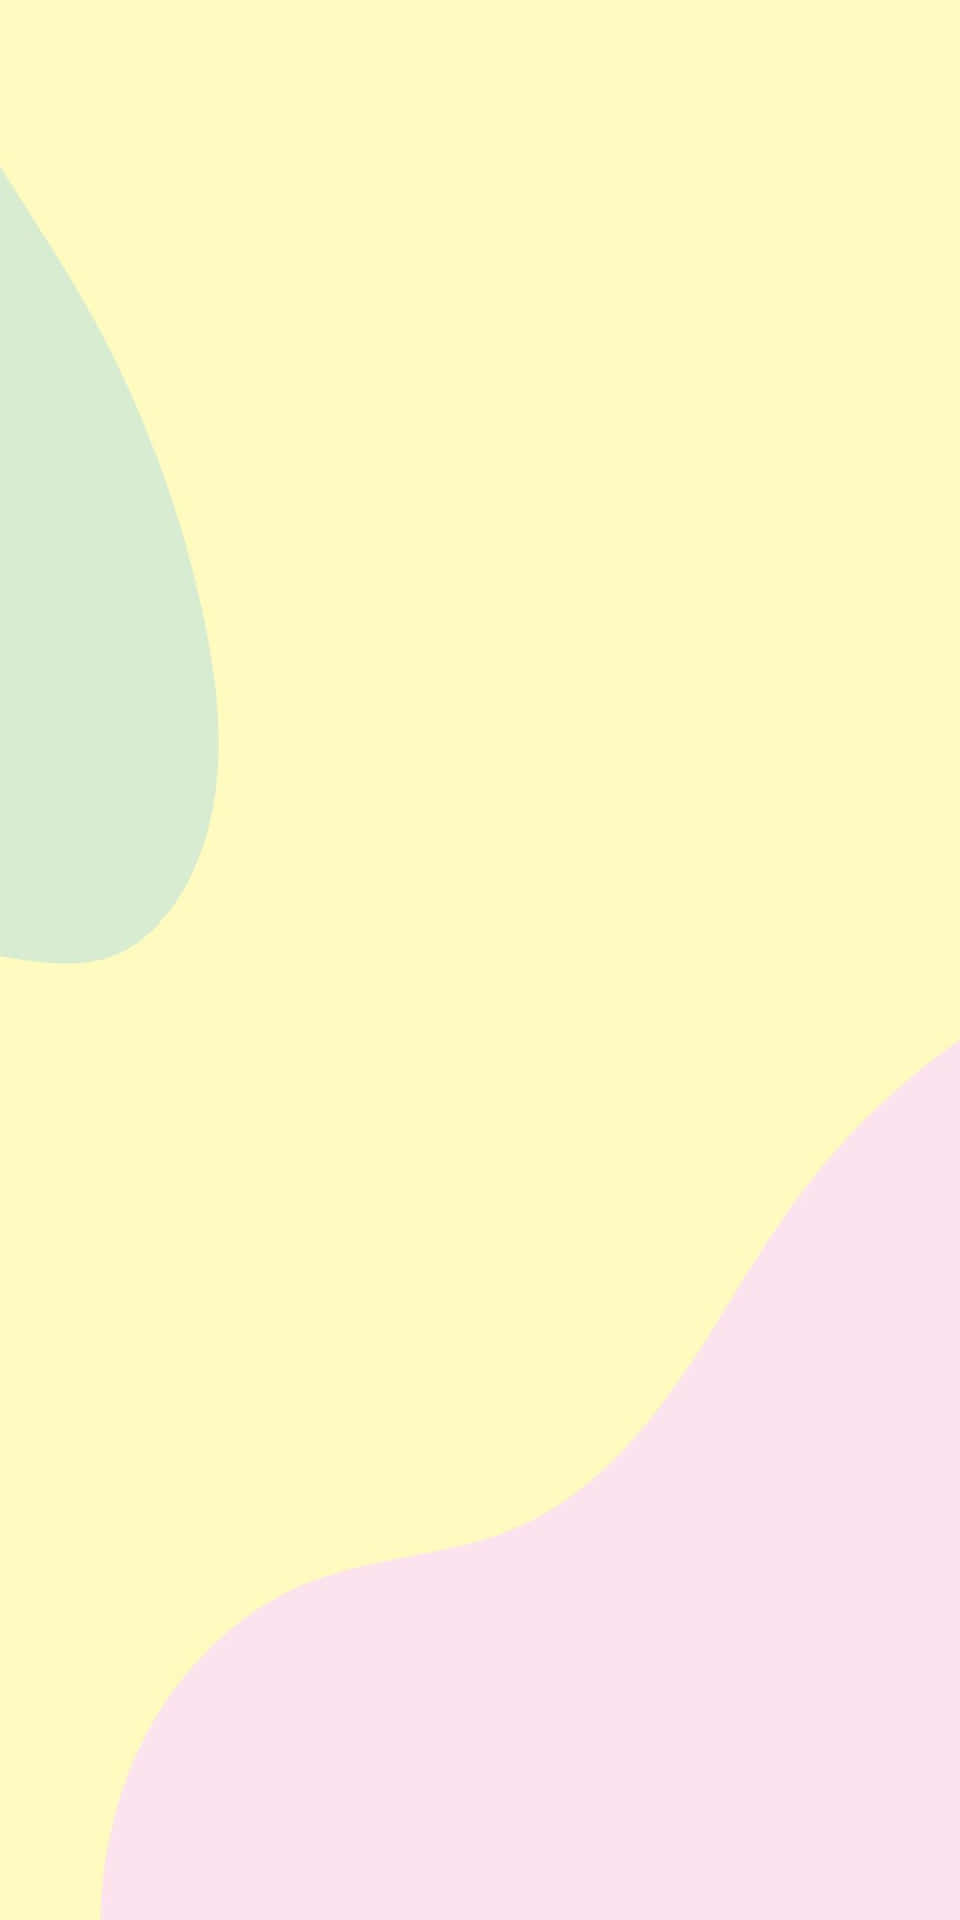 Pixel 3 Background Of Simple Pastel Colors